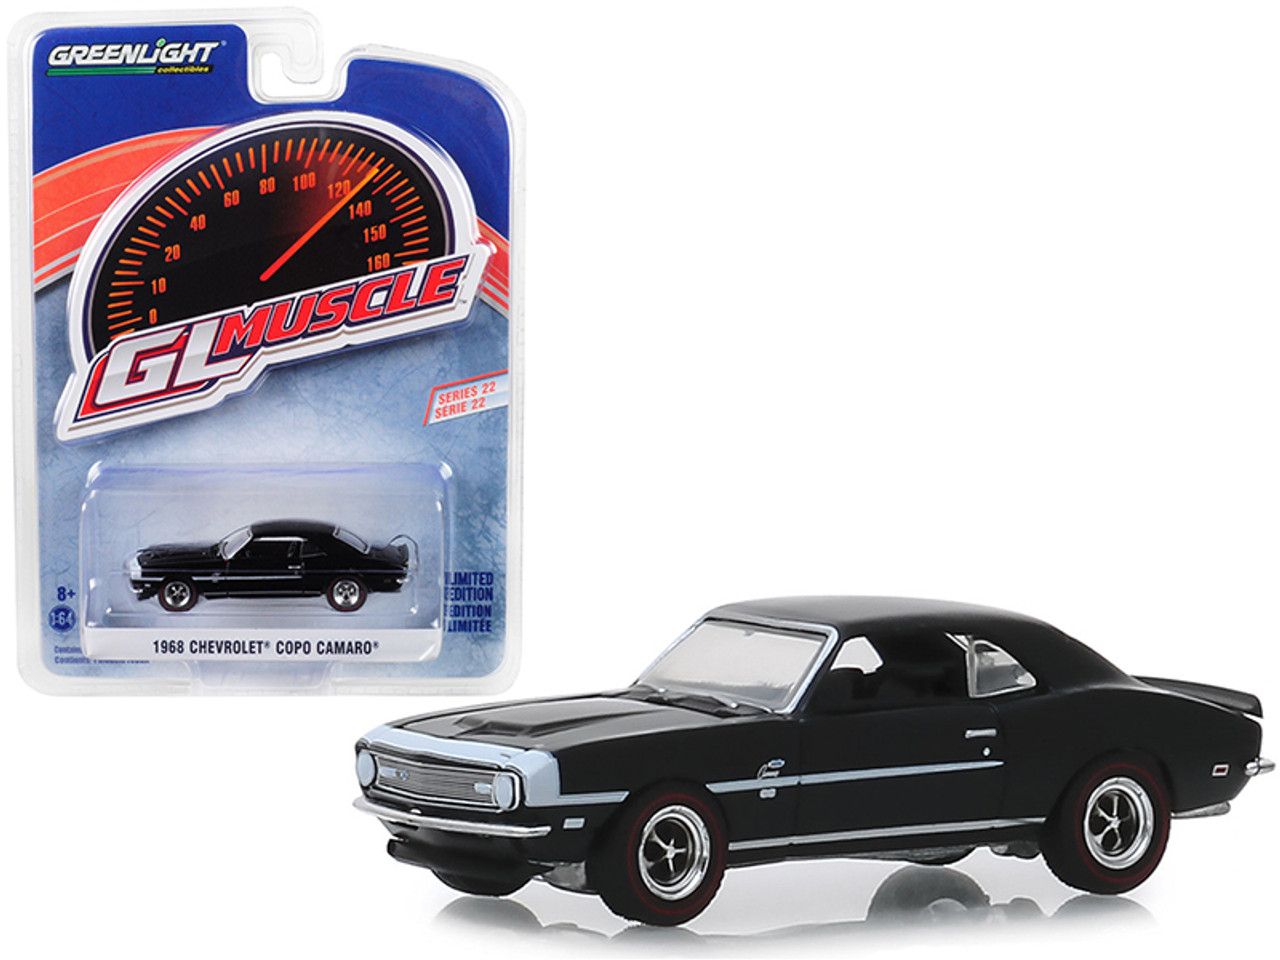 1968 Chevrolet COPO Camaro Tuxedo Black with White Stripes "Greenlight Muscle" Series 22 1/64 Diecast Model Car by Greenlight